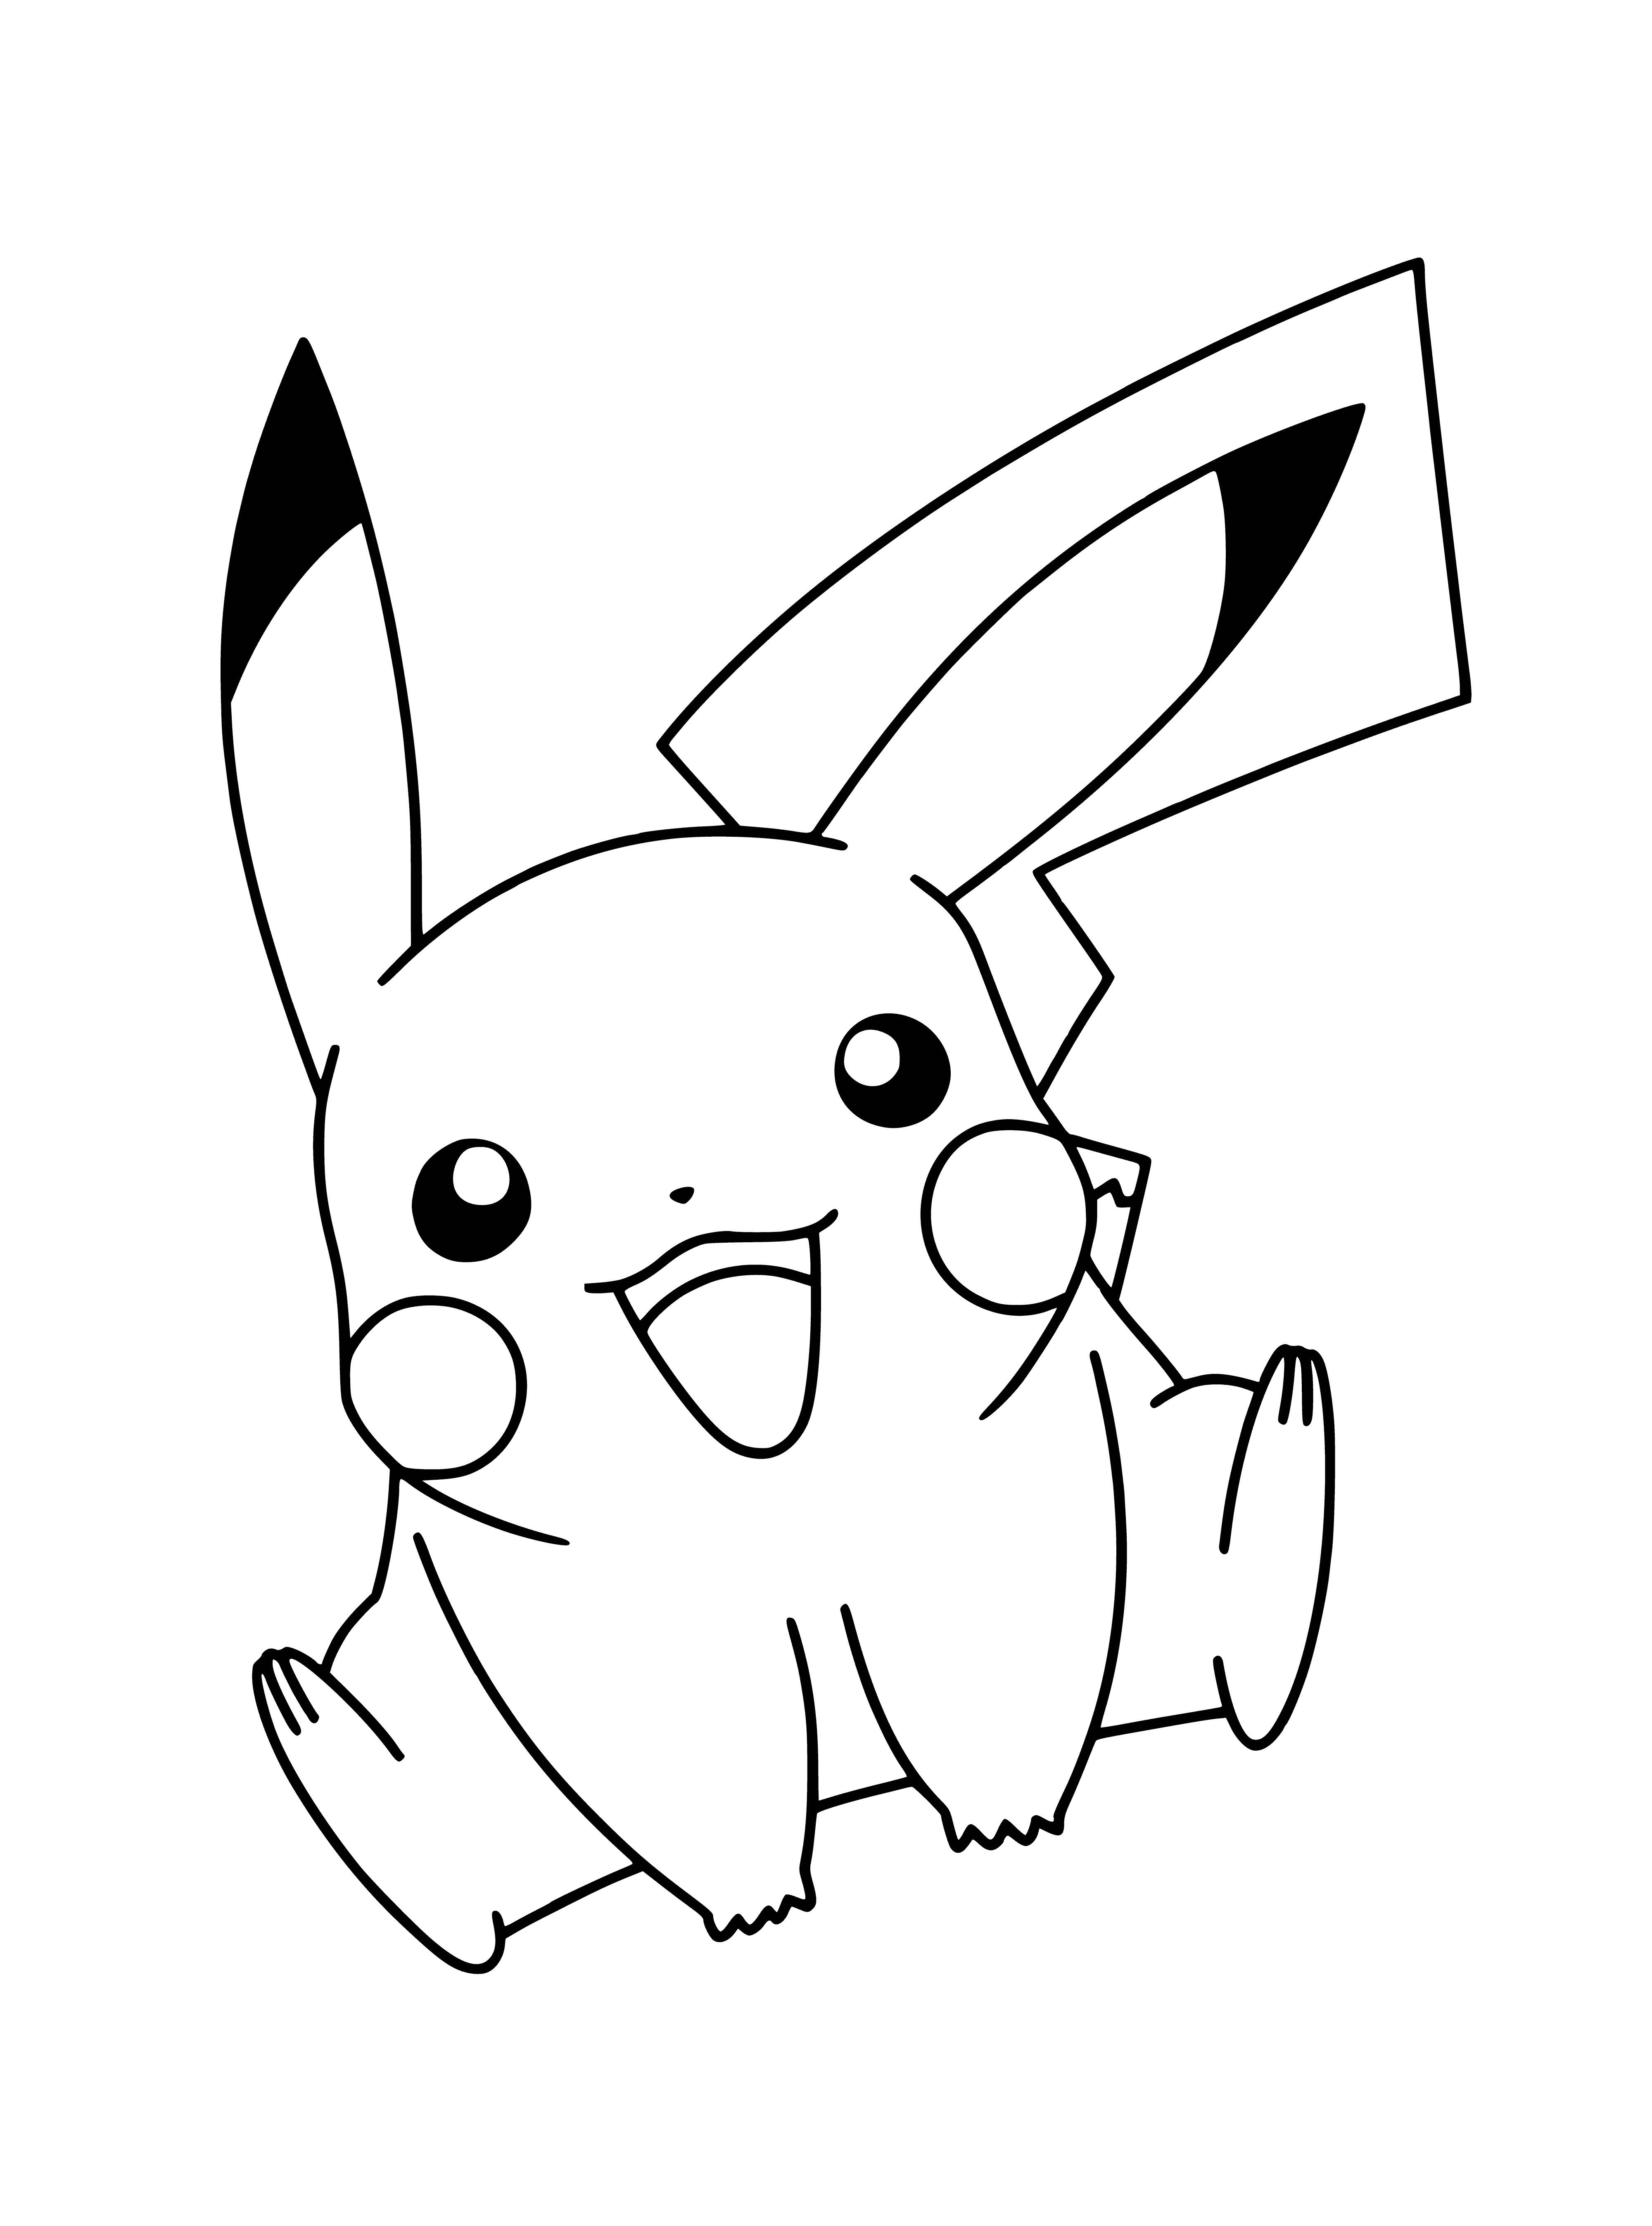 coloring page: Popular electric mouse Pokémon, Pikachu, has yellow body with black stripes, red check & big brown eyes. A favorite of many!